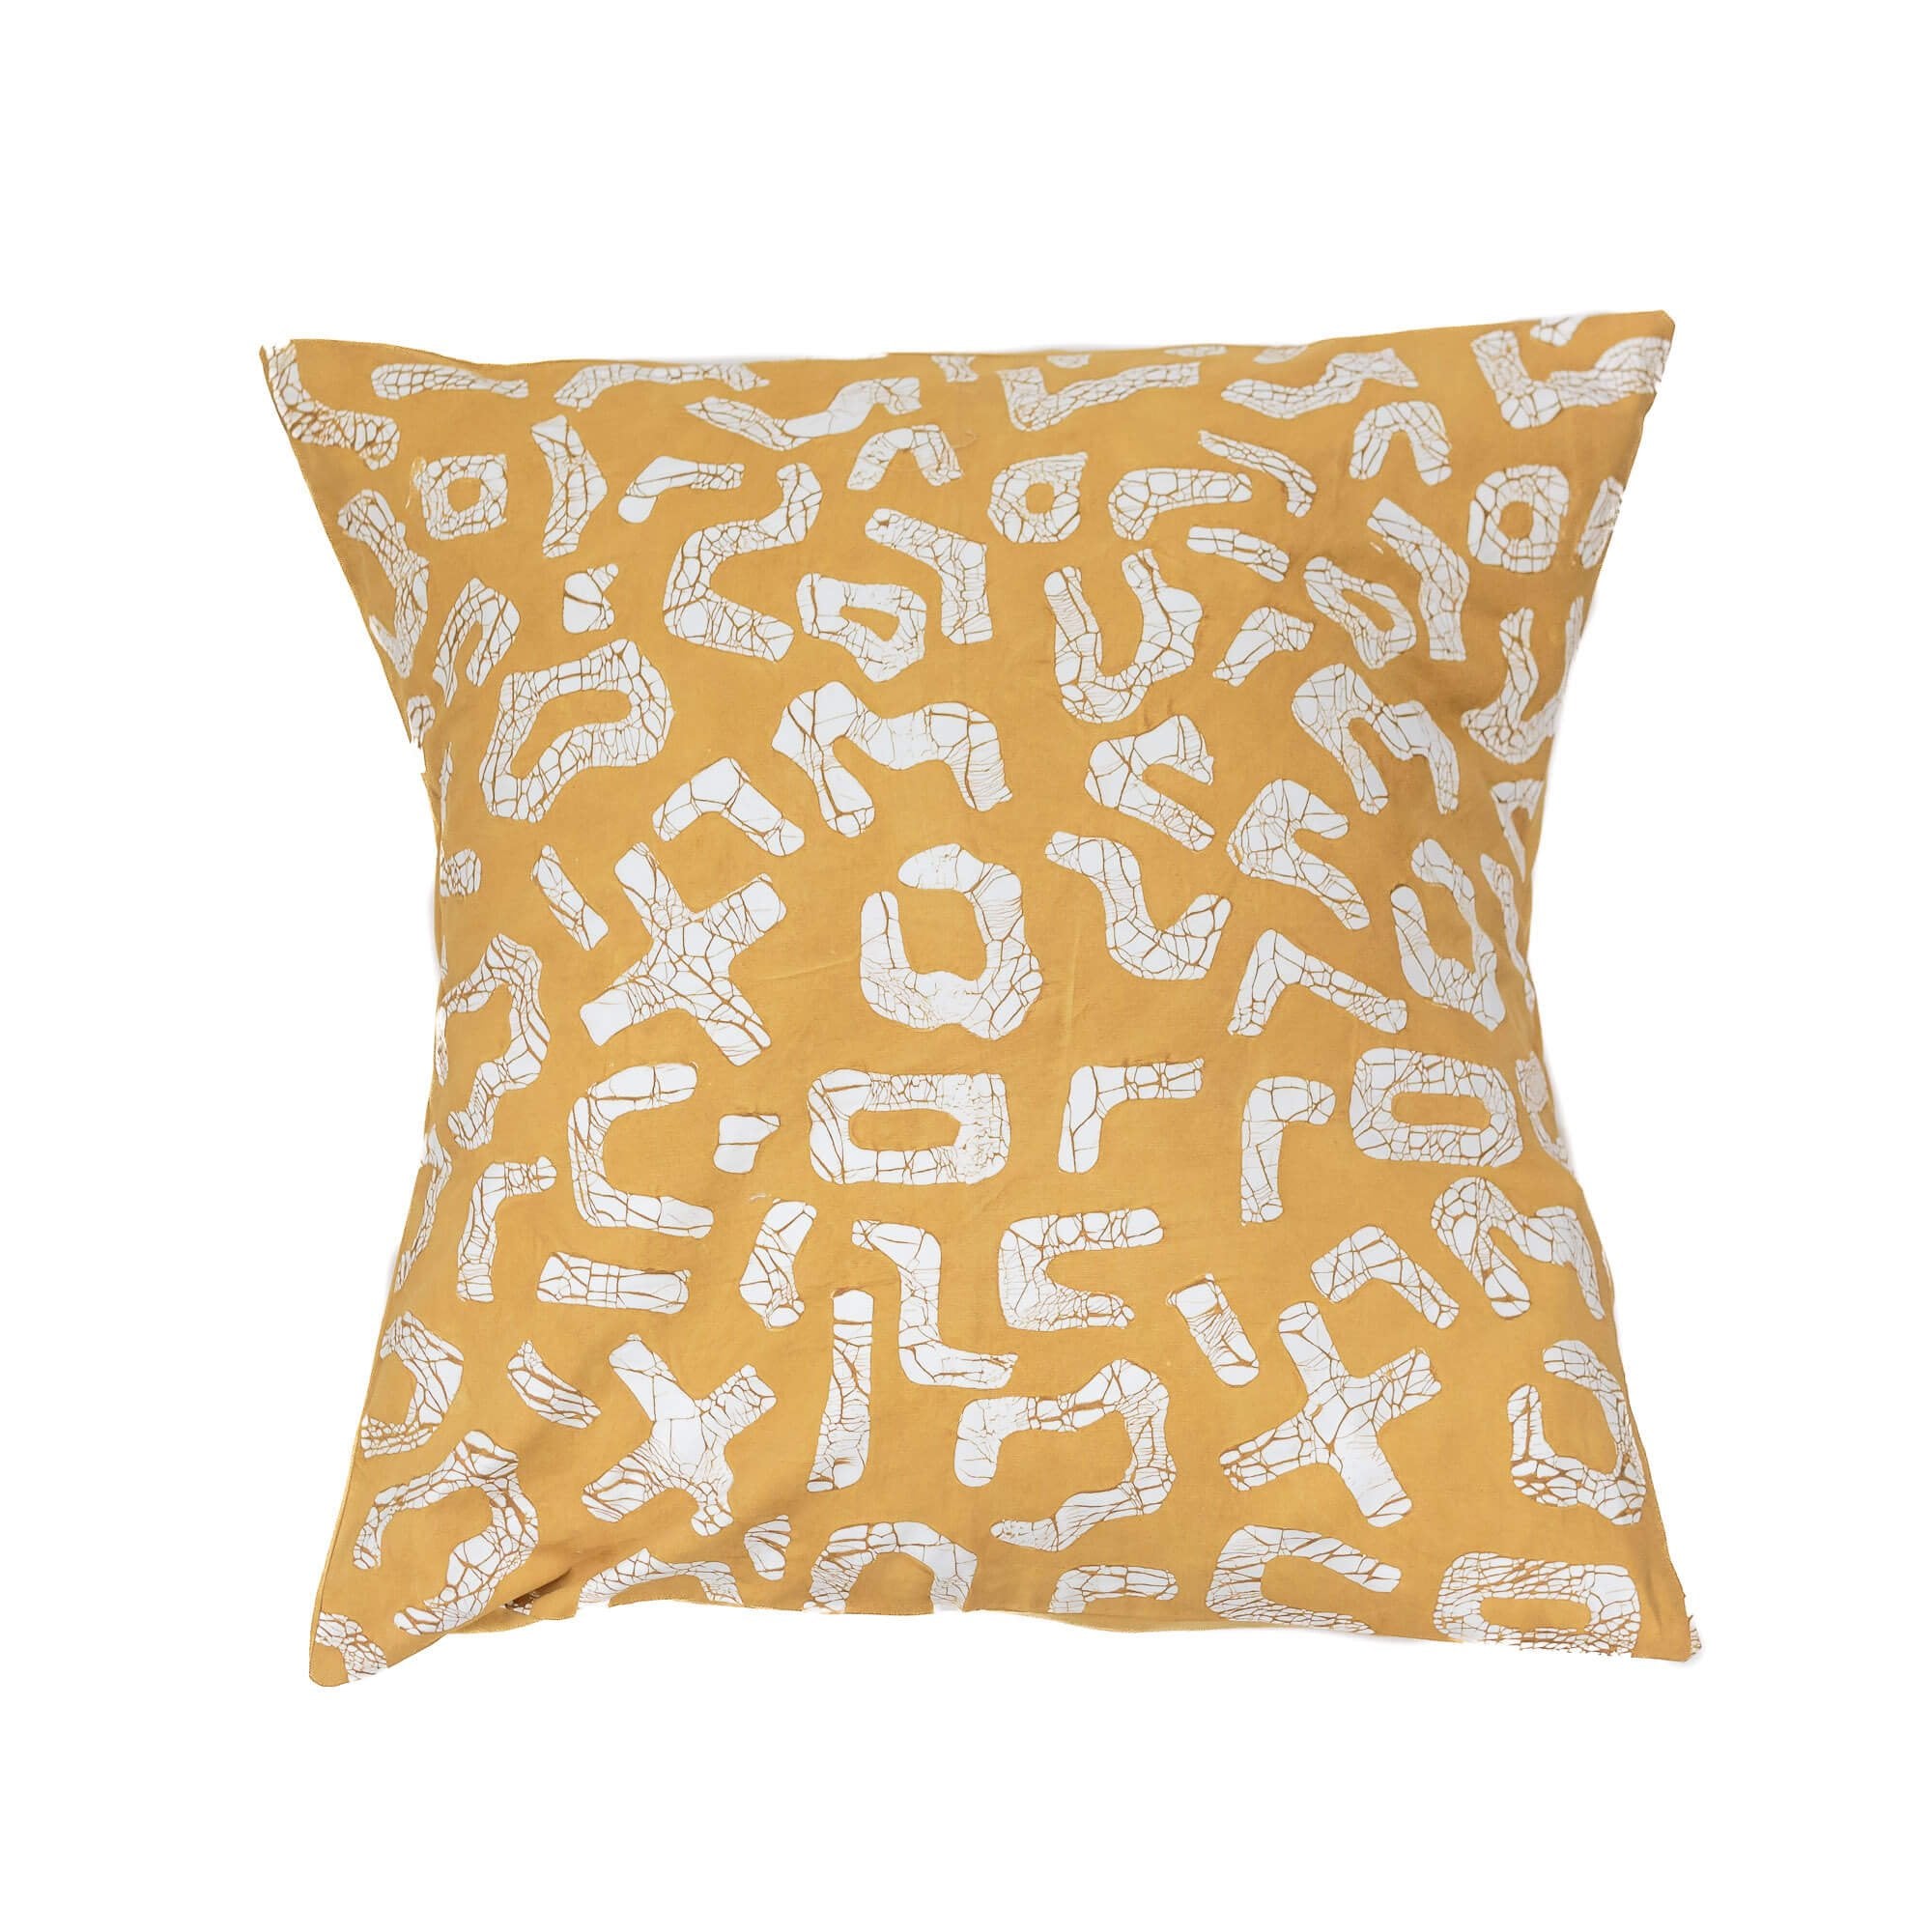 Kuba Mustard Filled Cushion Cover - Hand Painted by TRIBAL TEXTILES - Handcrafted Home Decor Interiors - African Made